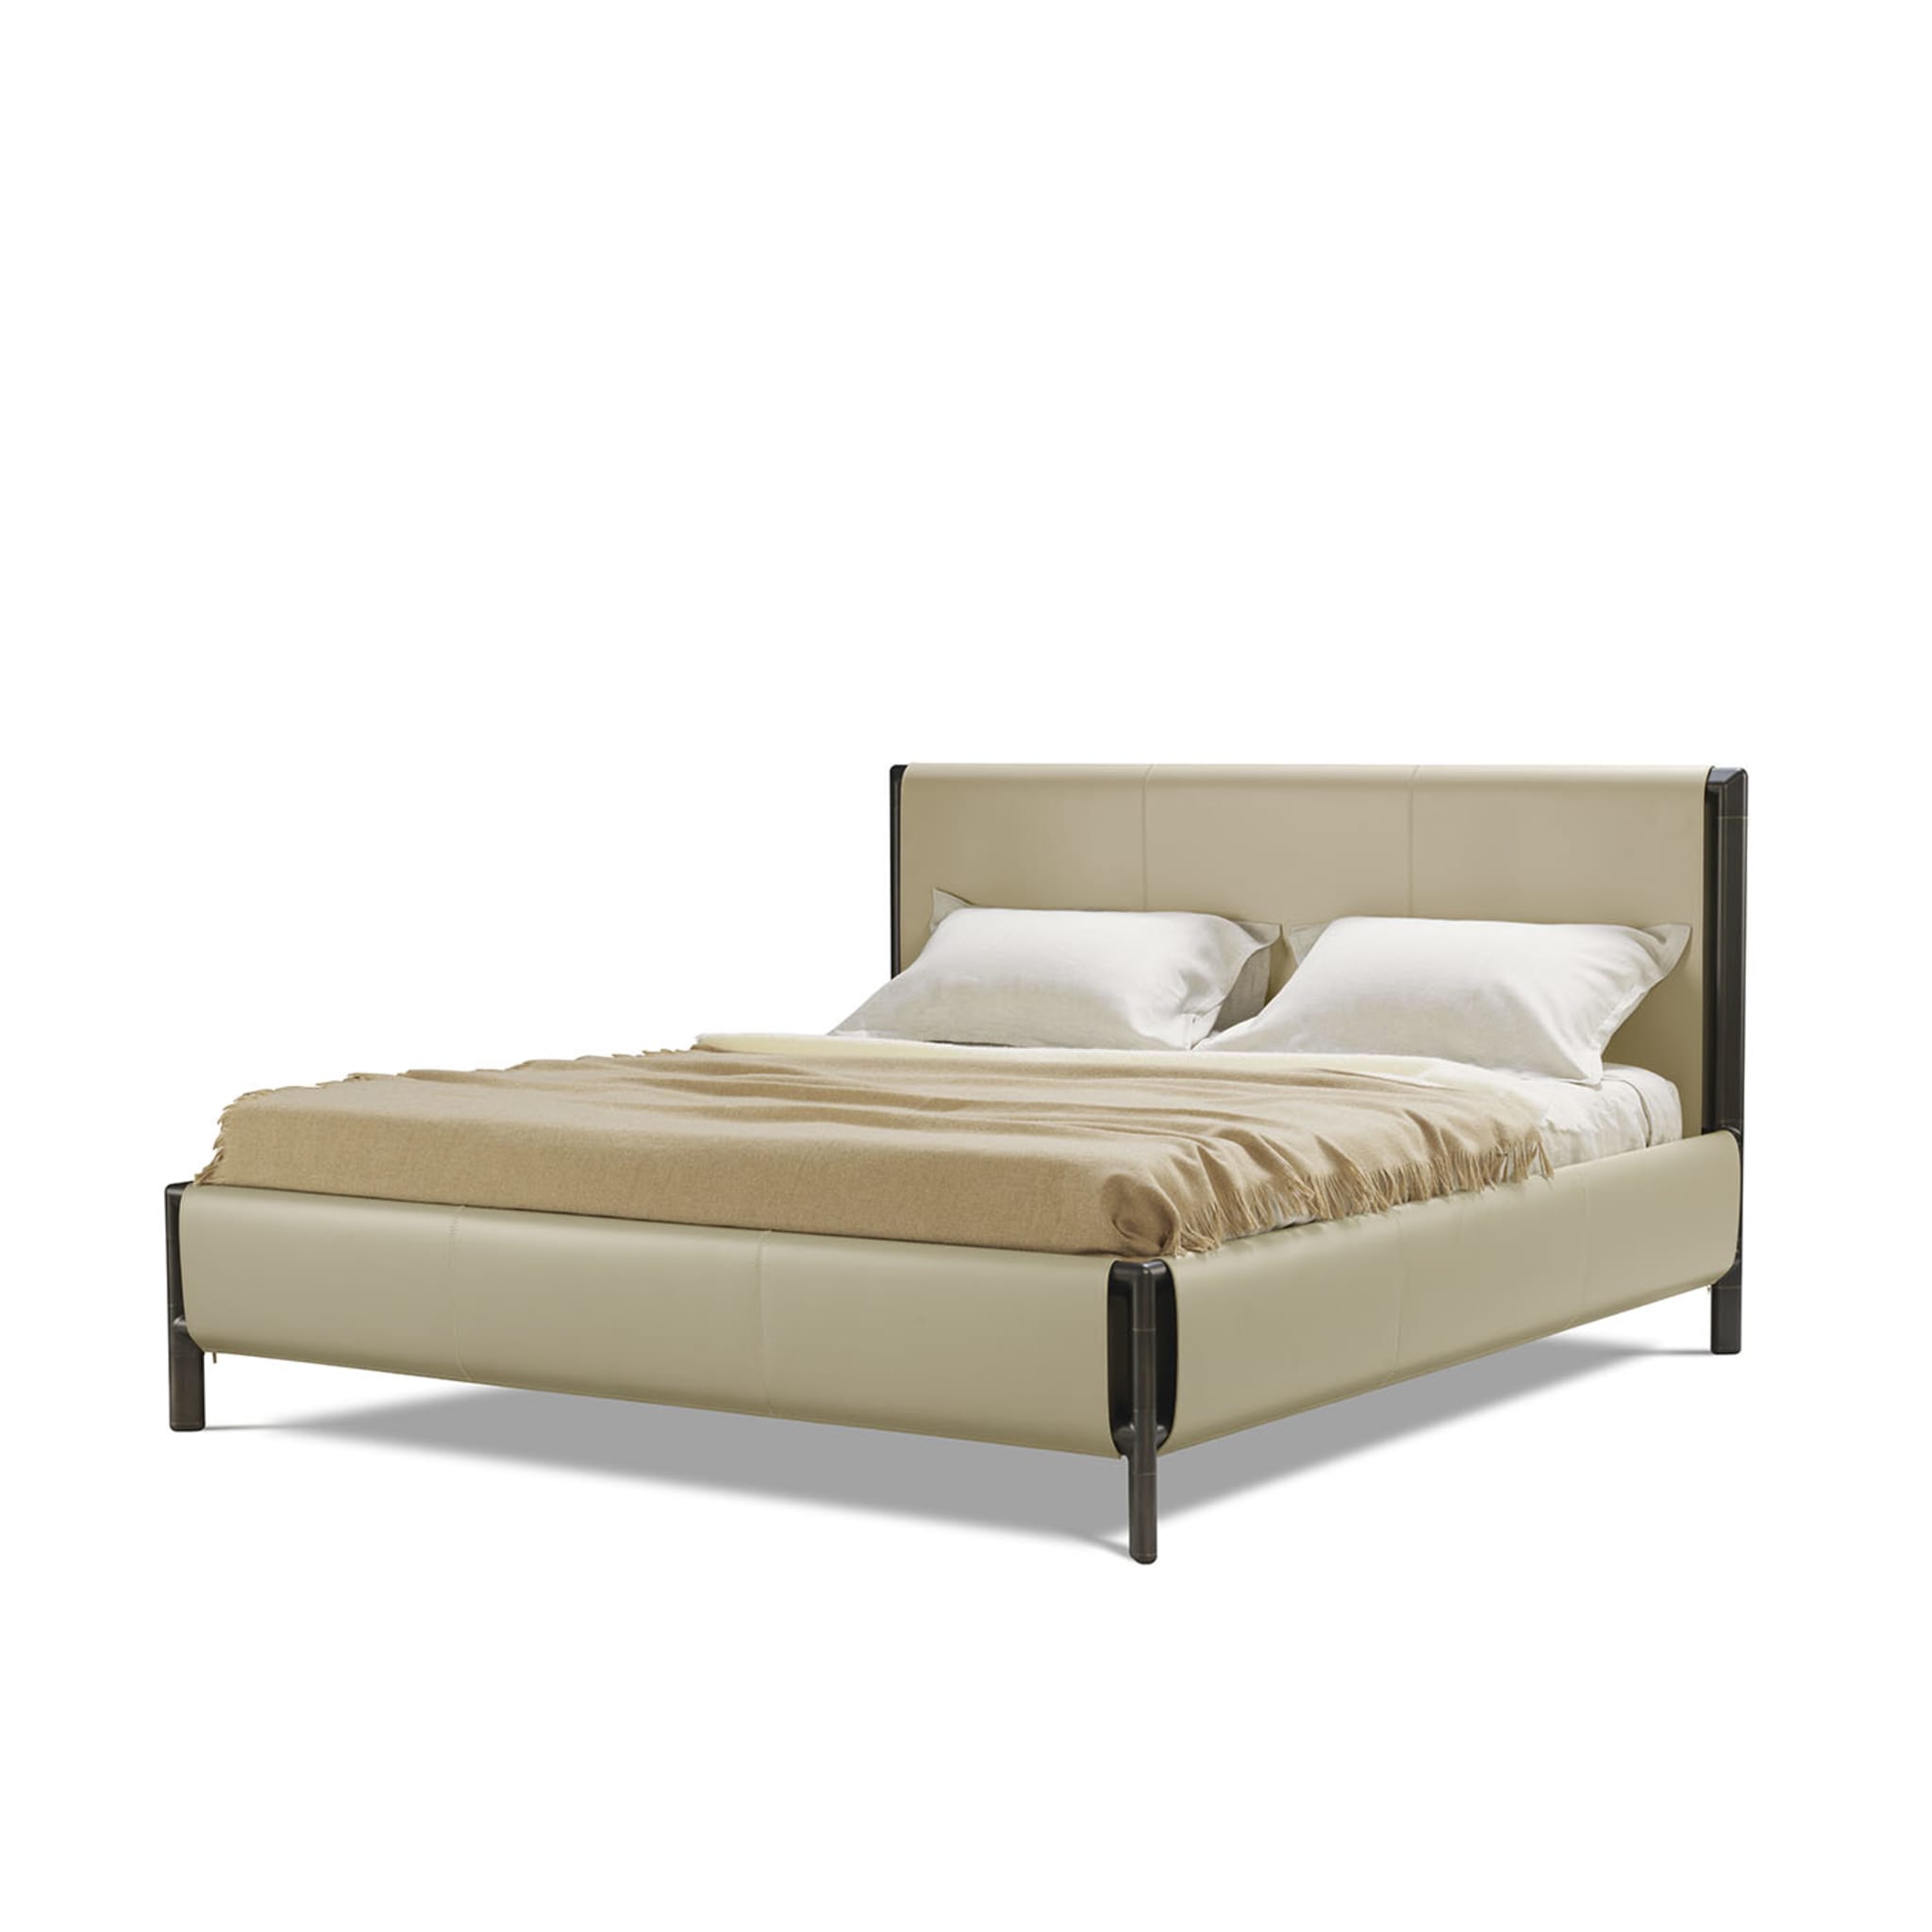 Frame Bed by Stefano Giovannoni - Alternative view 1